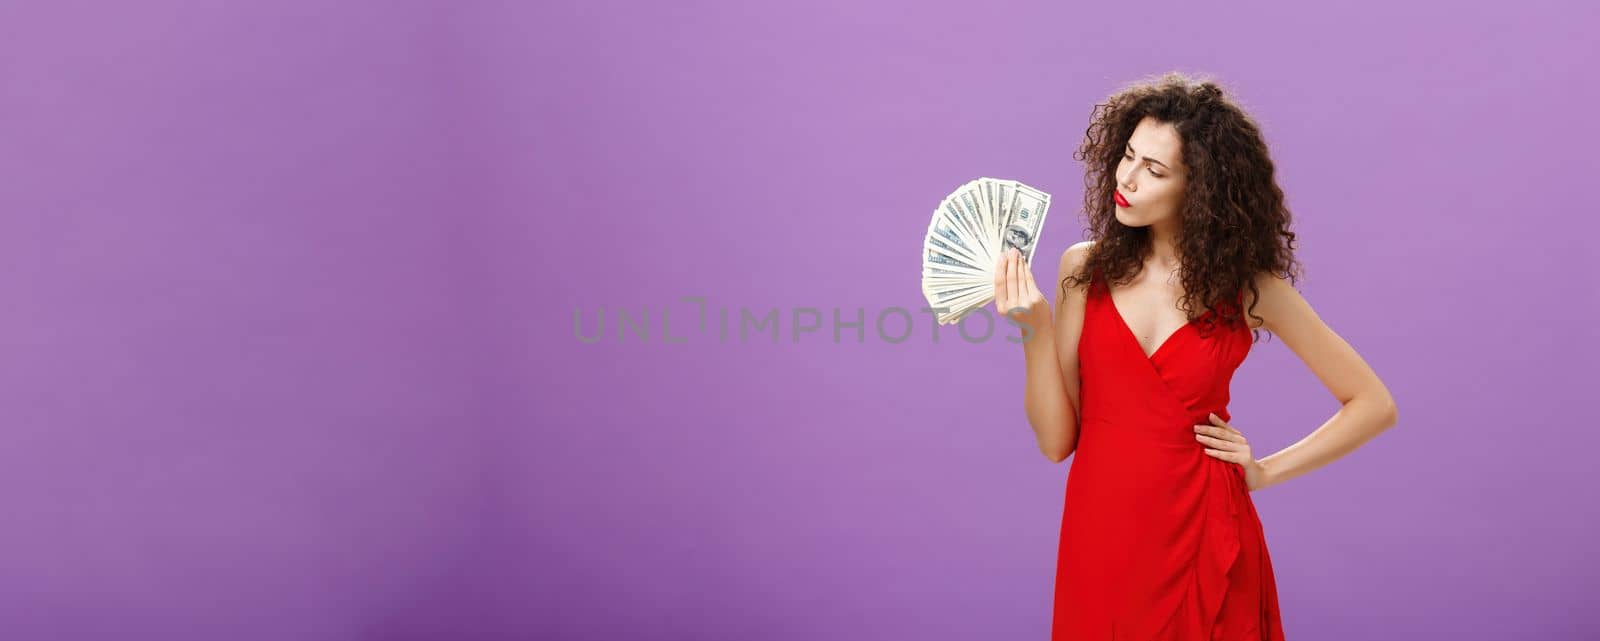 Woman deciding how spend lots of cash holding and looking at money. folding lips making decision or thinking how hard being rich standing elegant over purple background in red dress and curly hairstyle.